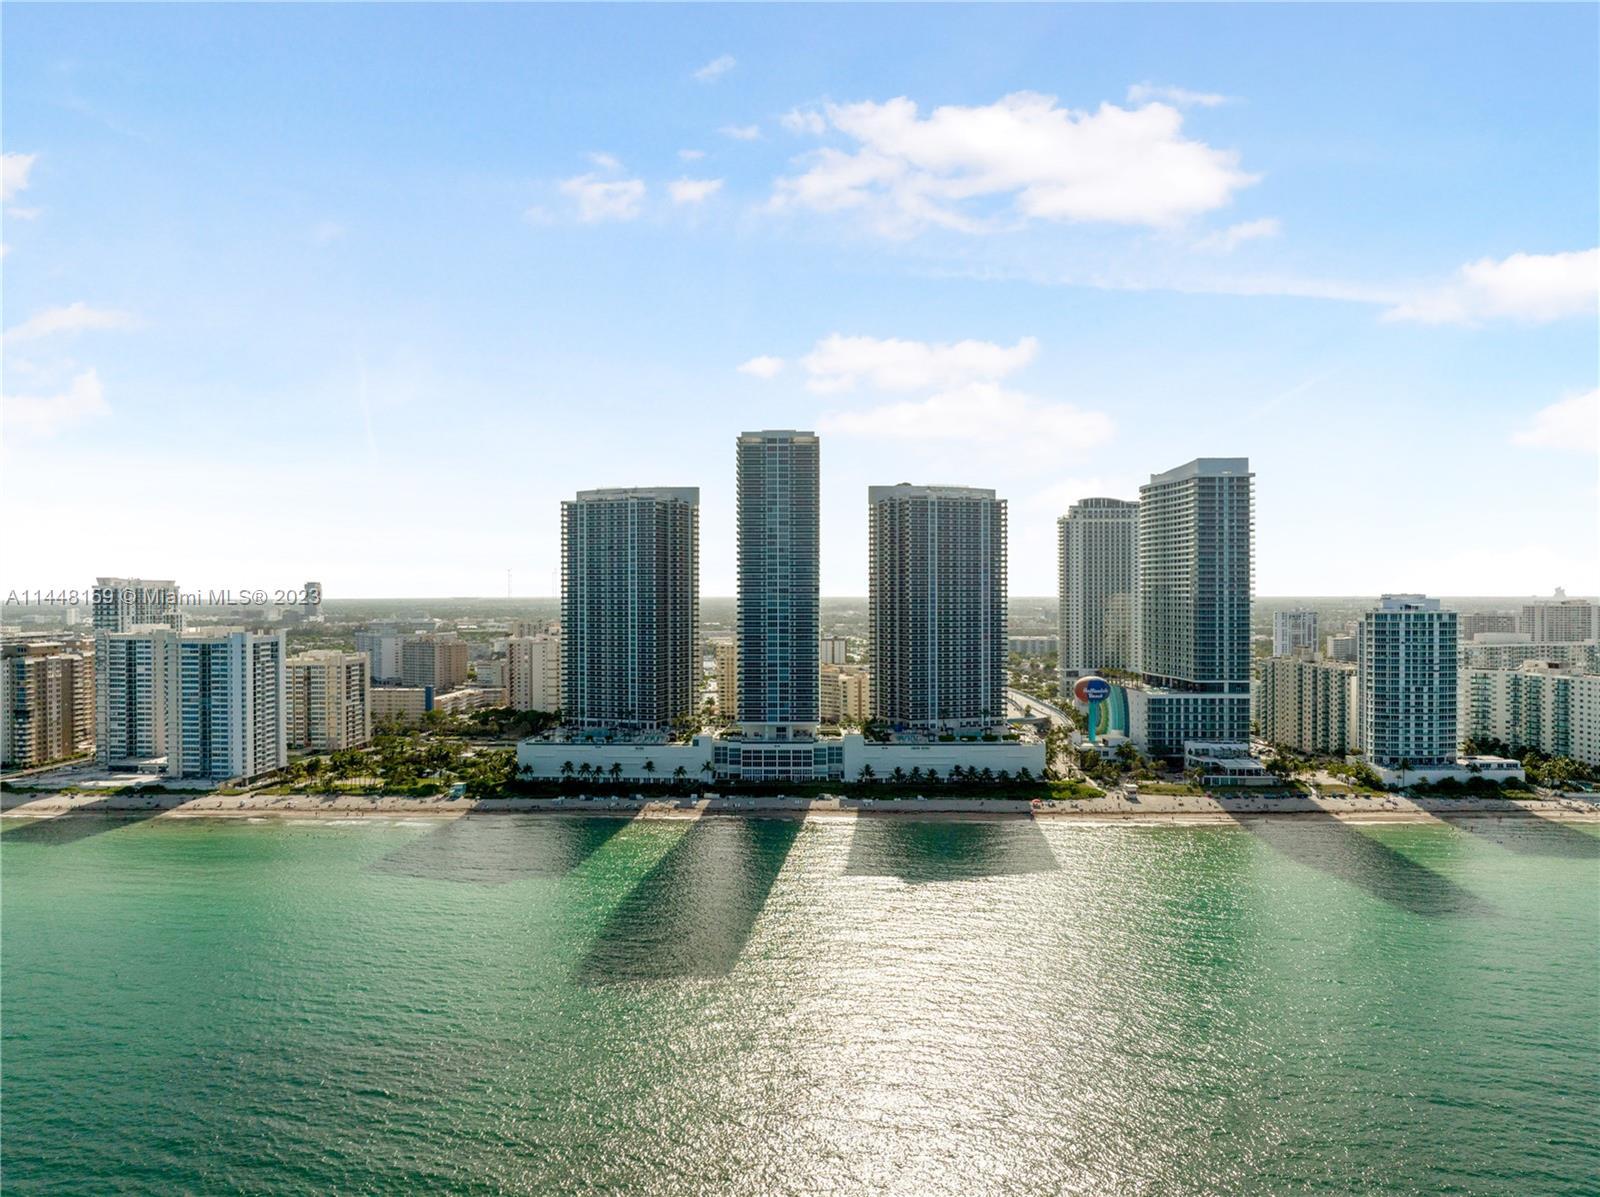 LUXURIOUS CORNER UNIT ON THE 38TH FLOOR WITH BREATHTAKING OCEAN, INTRACOASTAL, & CITY VIEWS! PREMIER